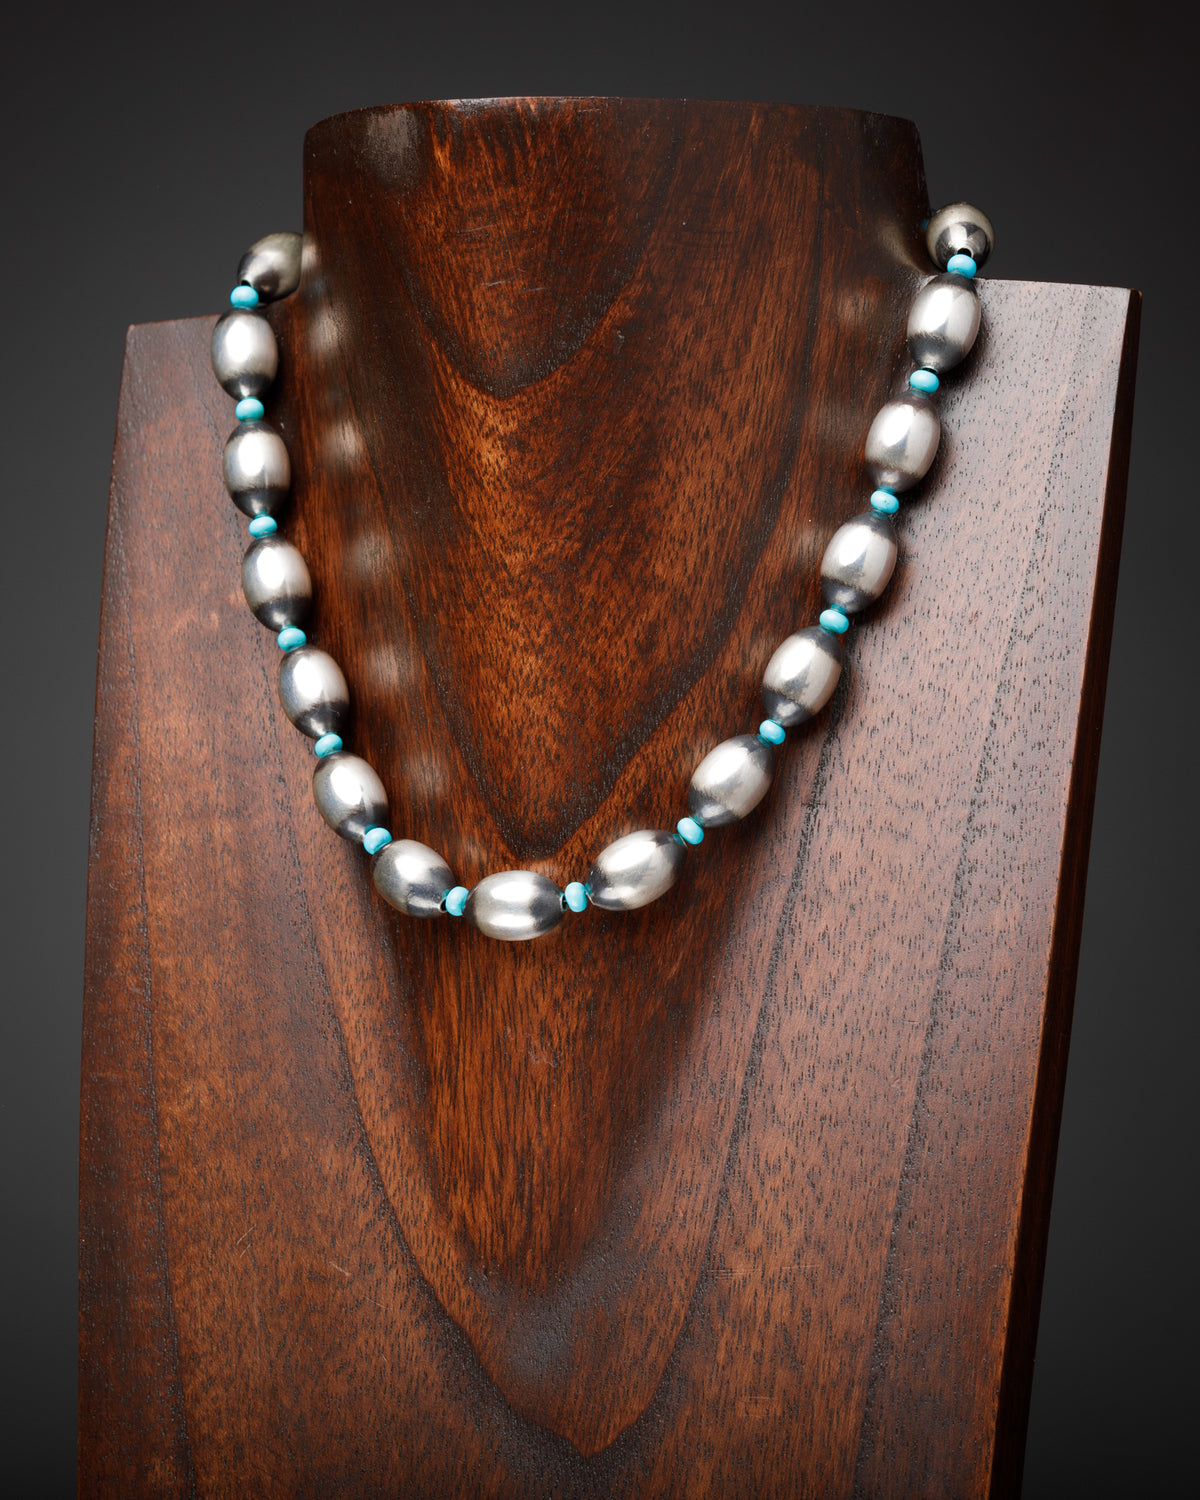 Oval Sterling Silver Santa Fe Pearl Necklace with Turquoise Accent Beads